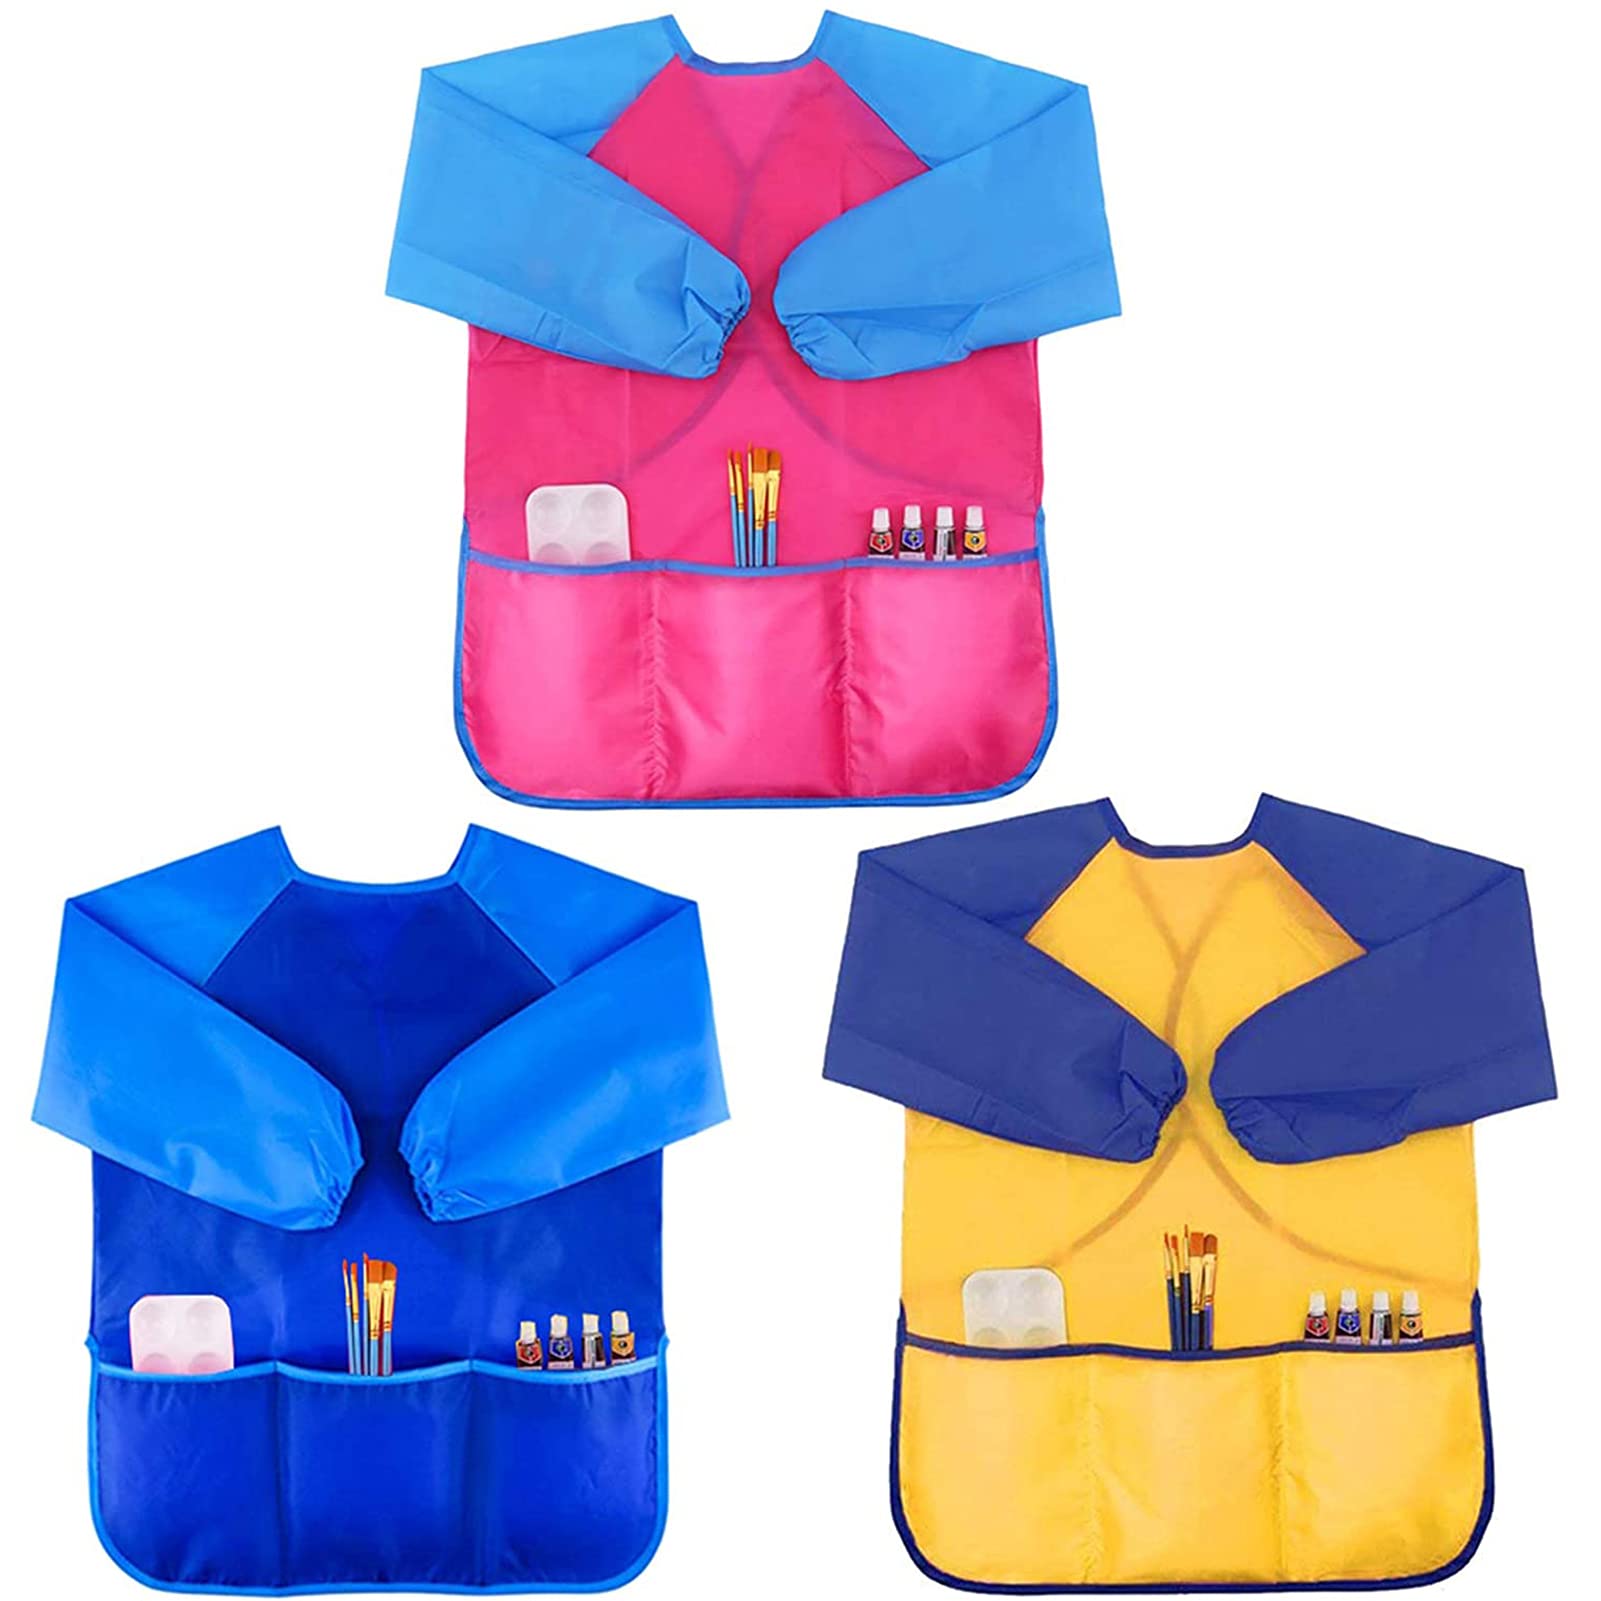 6Pcs Kids Art Smocks Toddler Smocks Waterproof Smocks for Kids Painting Colorful Children Aprons Artist Painting Smocks Long Sleeves With 3 Roomy Pockets for Kids Painting Supplies, Age 3-7 Years